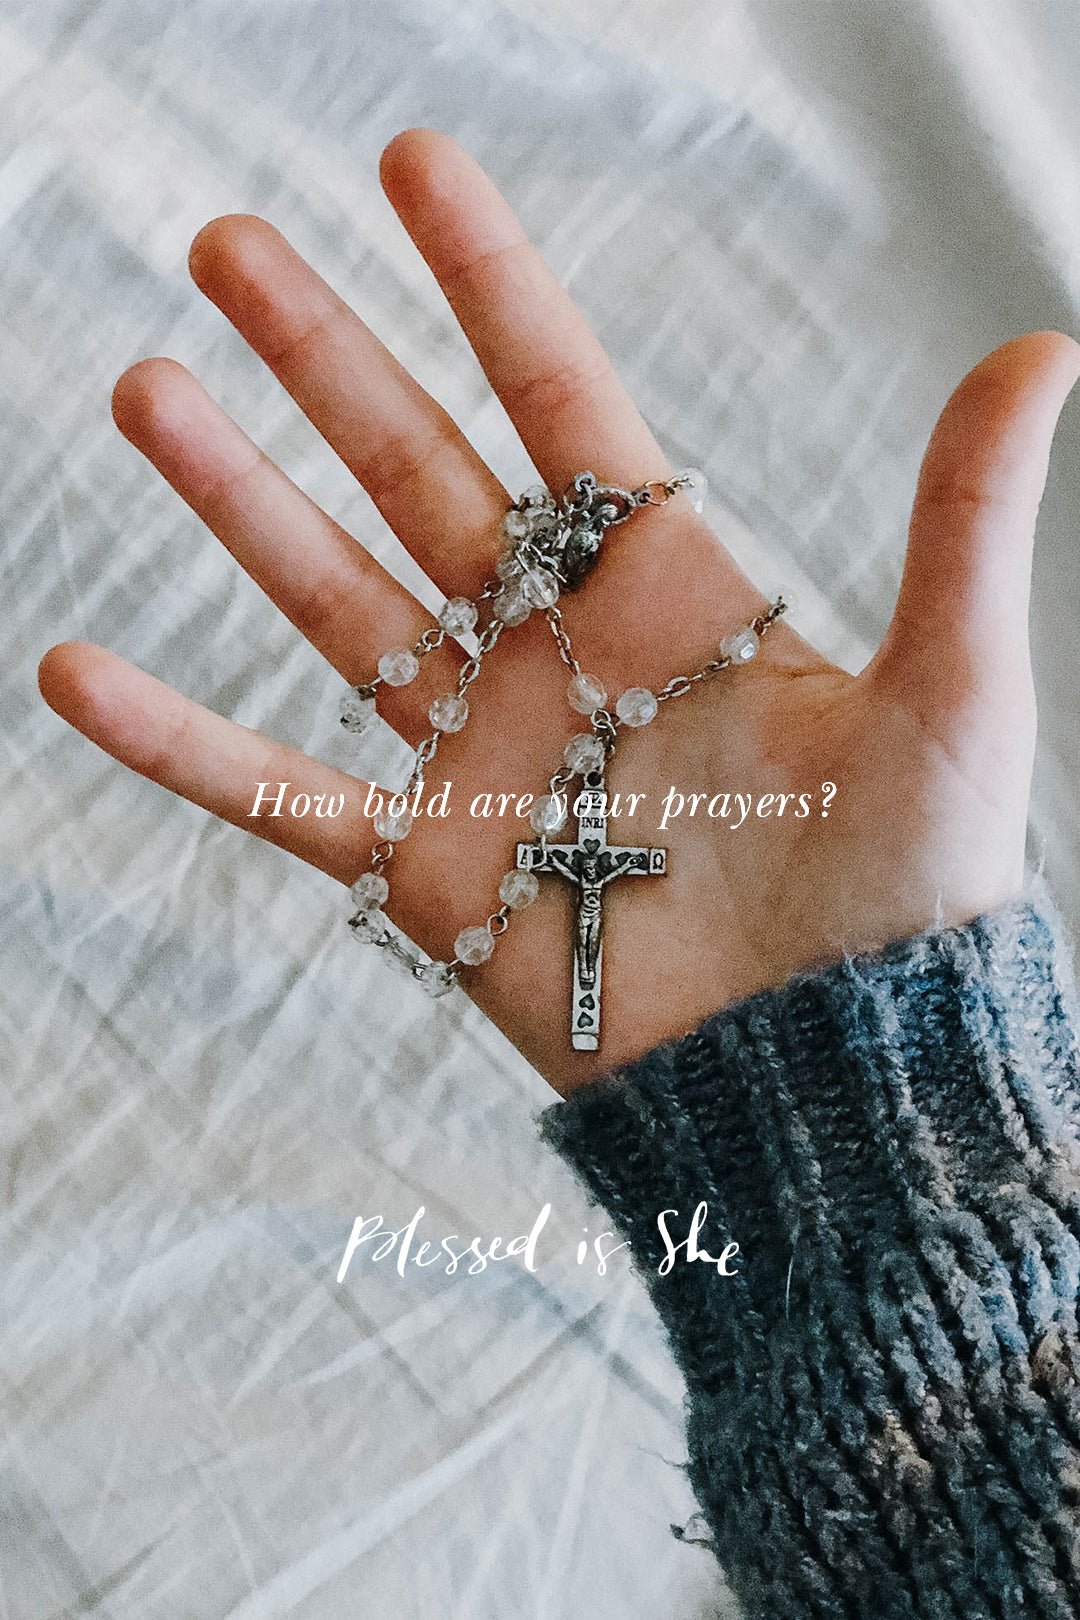 As He Believed - Blessed Is She